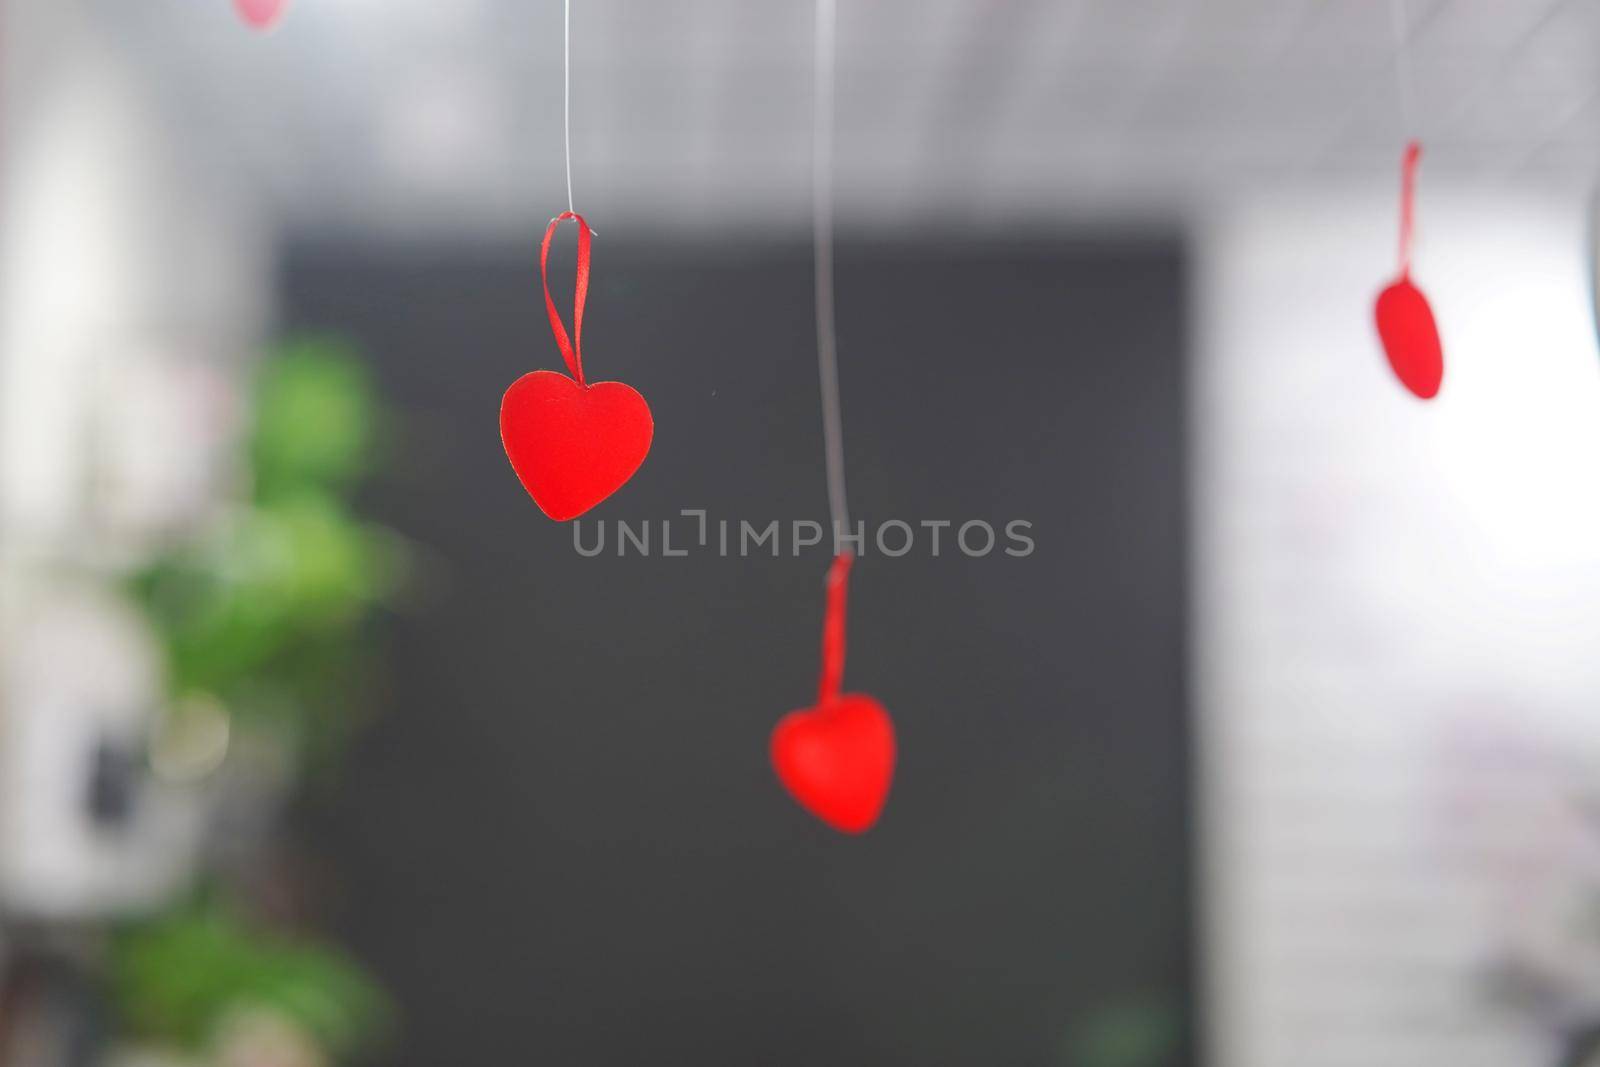 red hearts on strings in the interior. High quality photo